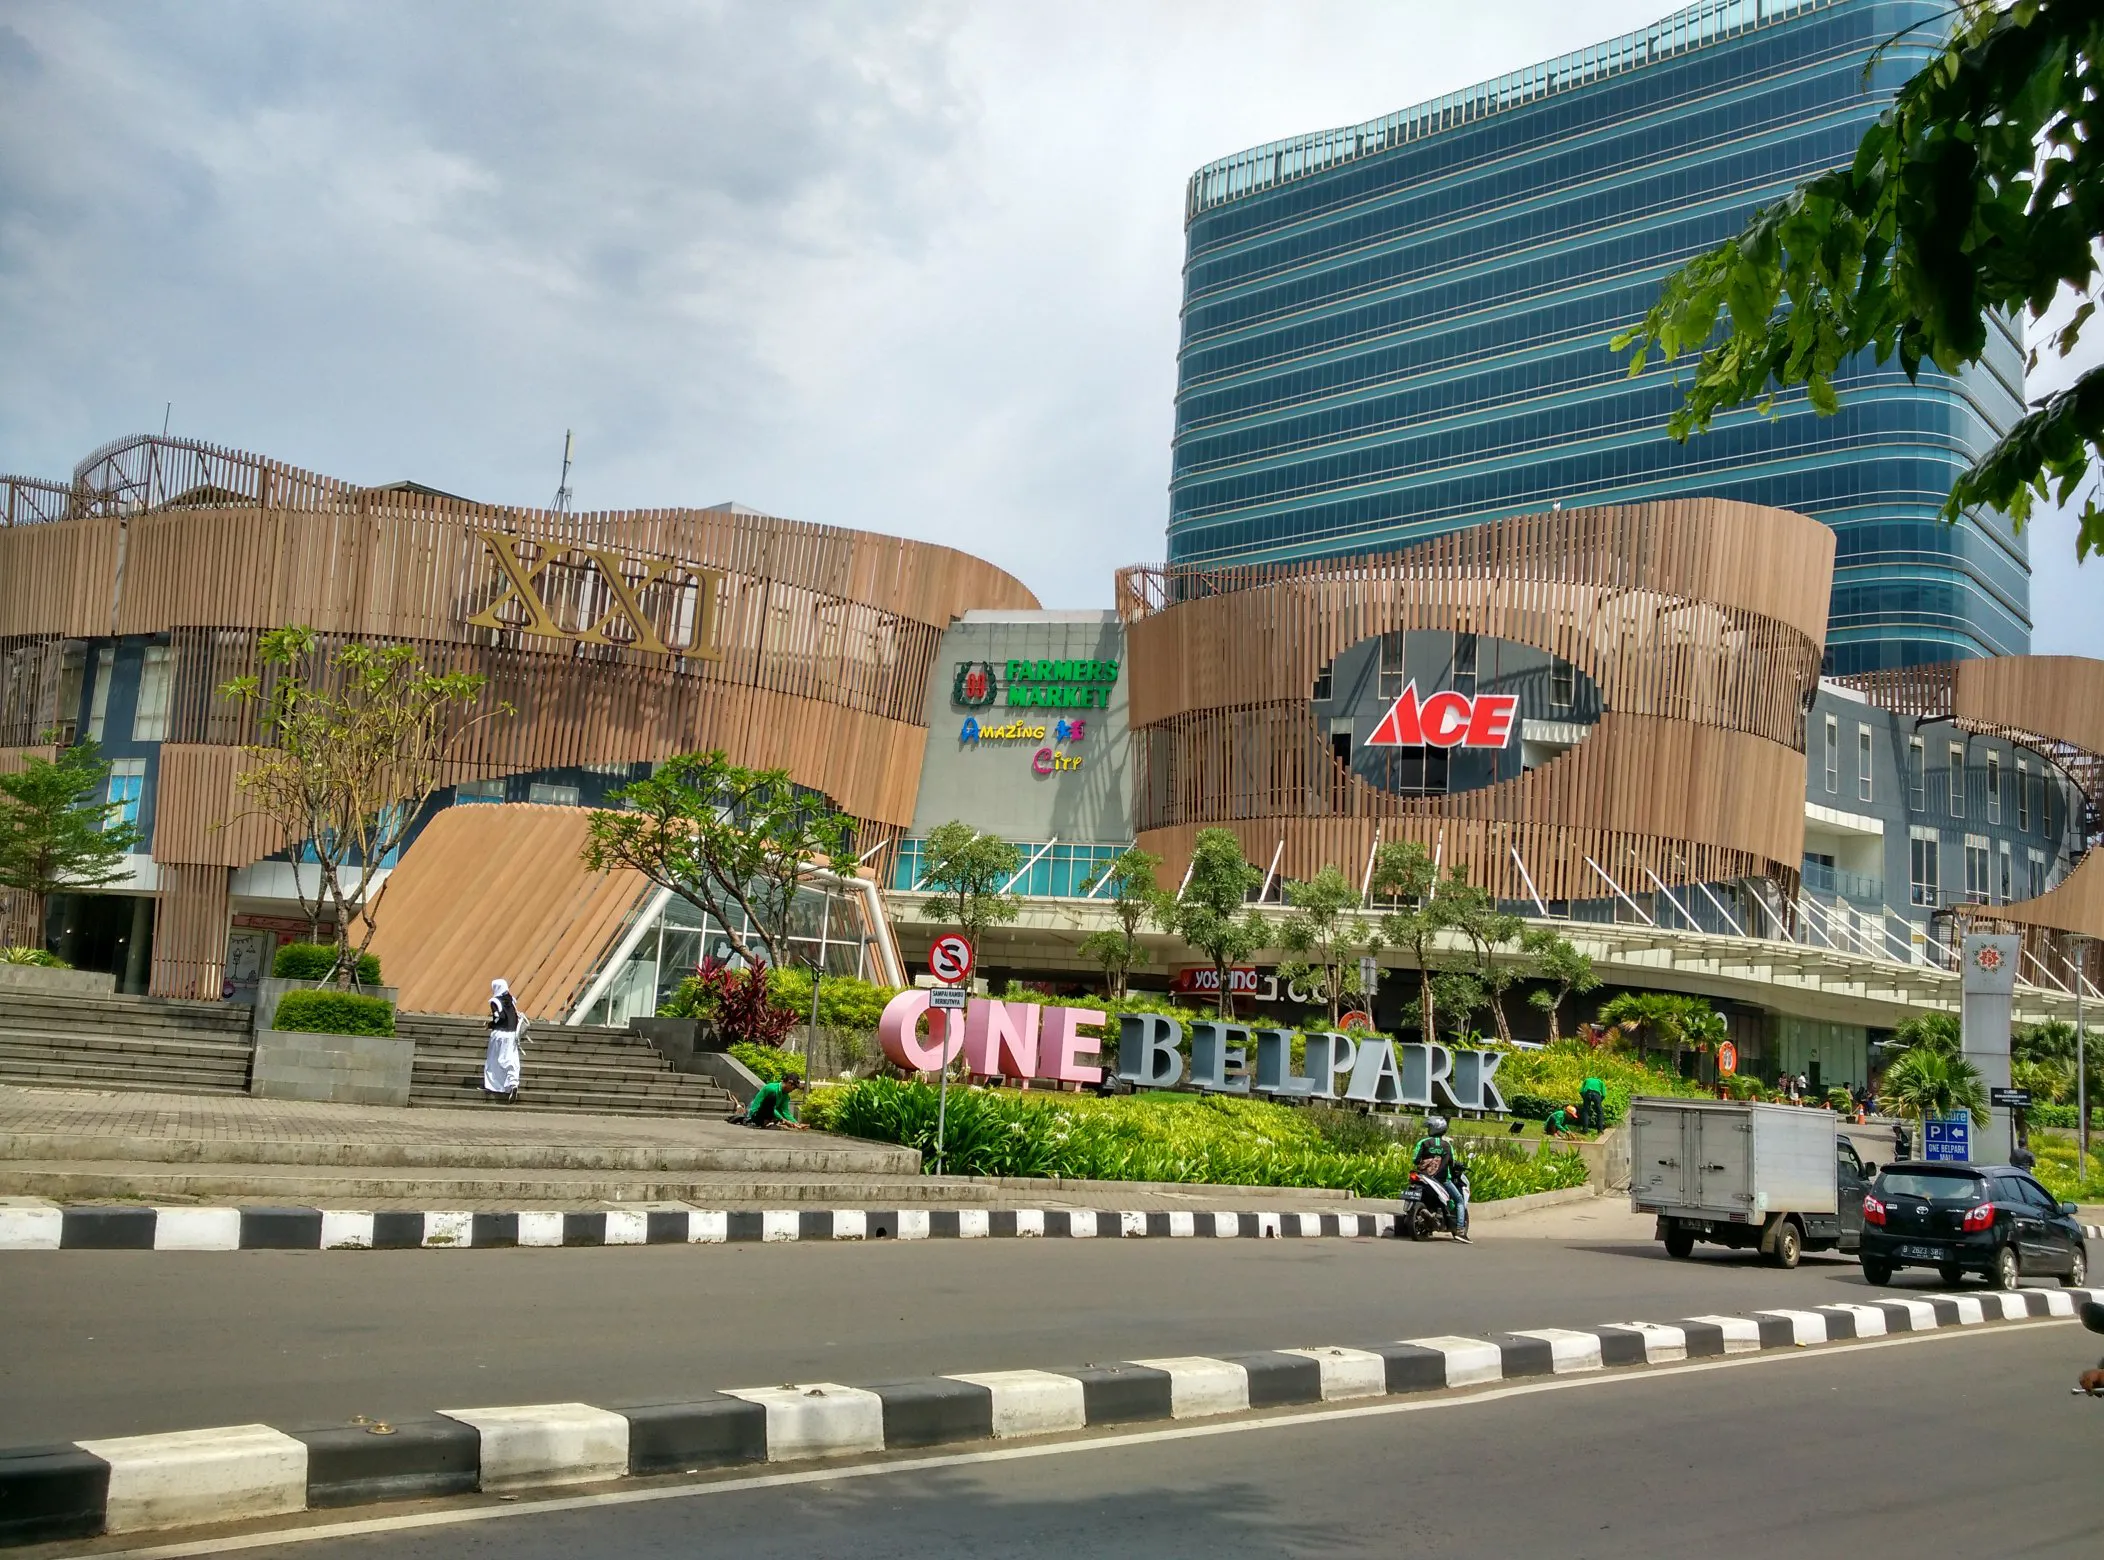 One Belpark Mall in Indonesia, central_asia | Handbags,Shoes,Accessories,Clothes,Sportswear,Swimwear - Country Helper